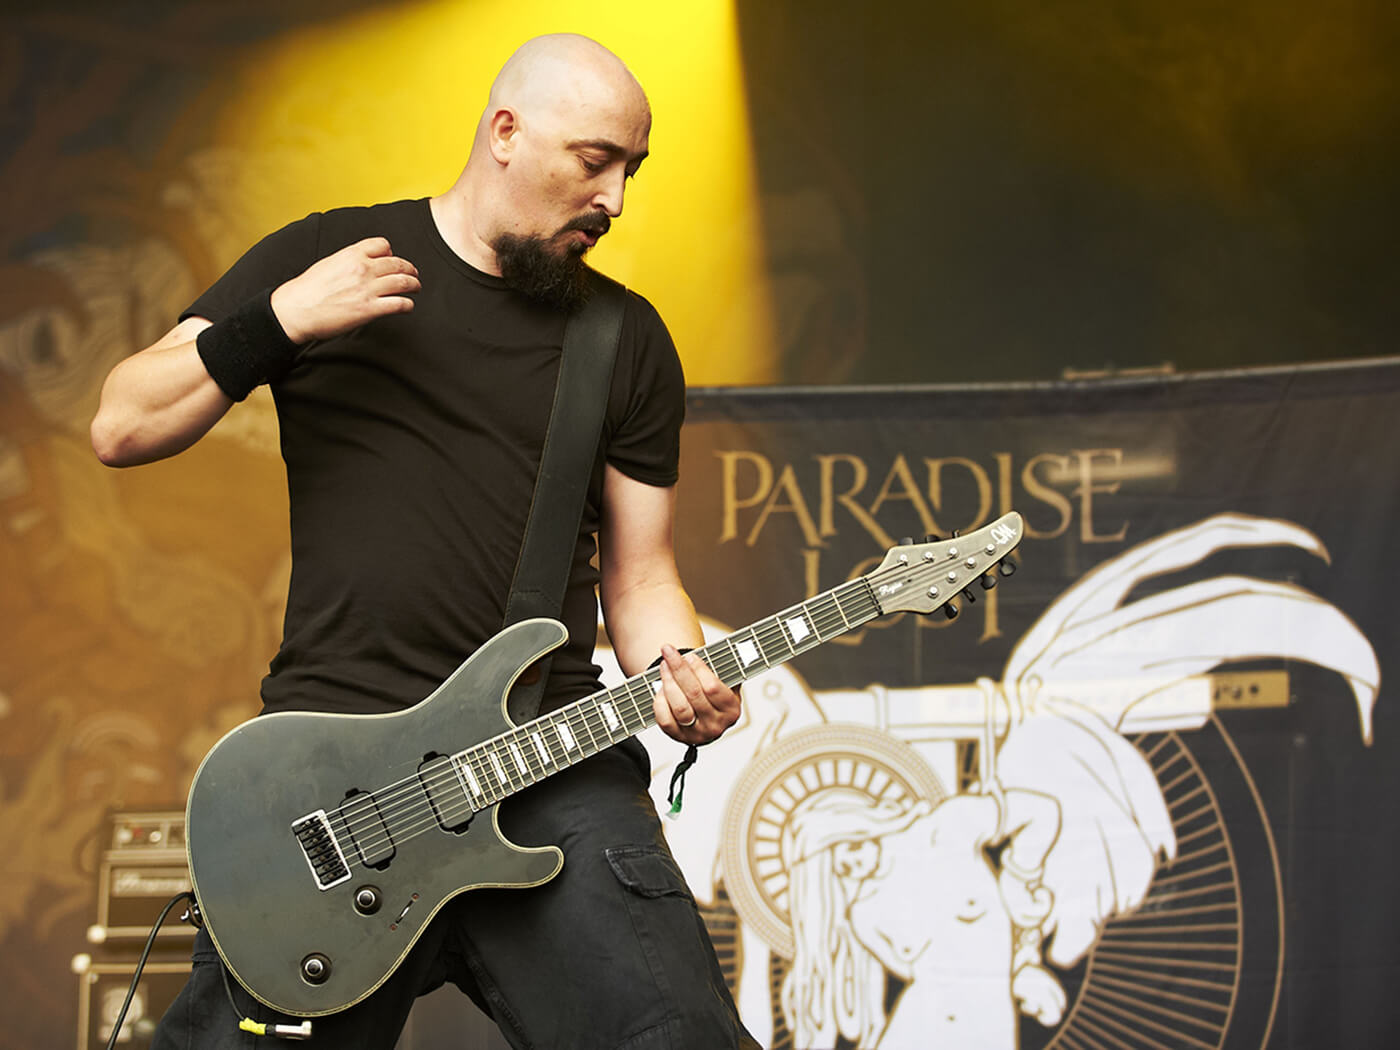 Aaron Aedy of Paradise Lost performing at Bloodstock Open Air in 2012